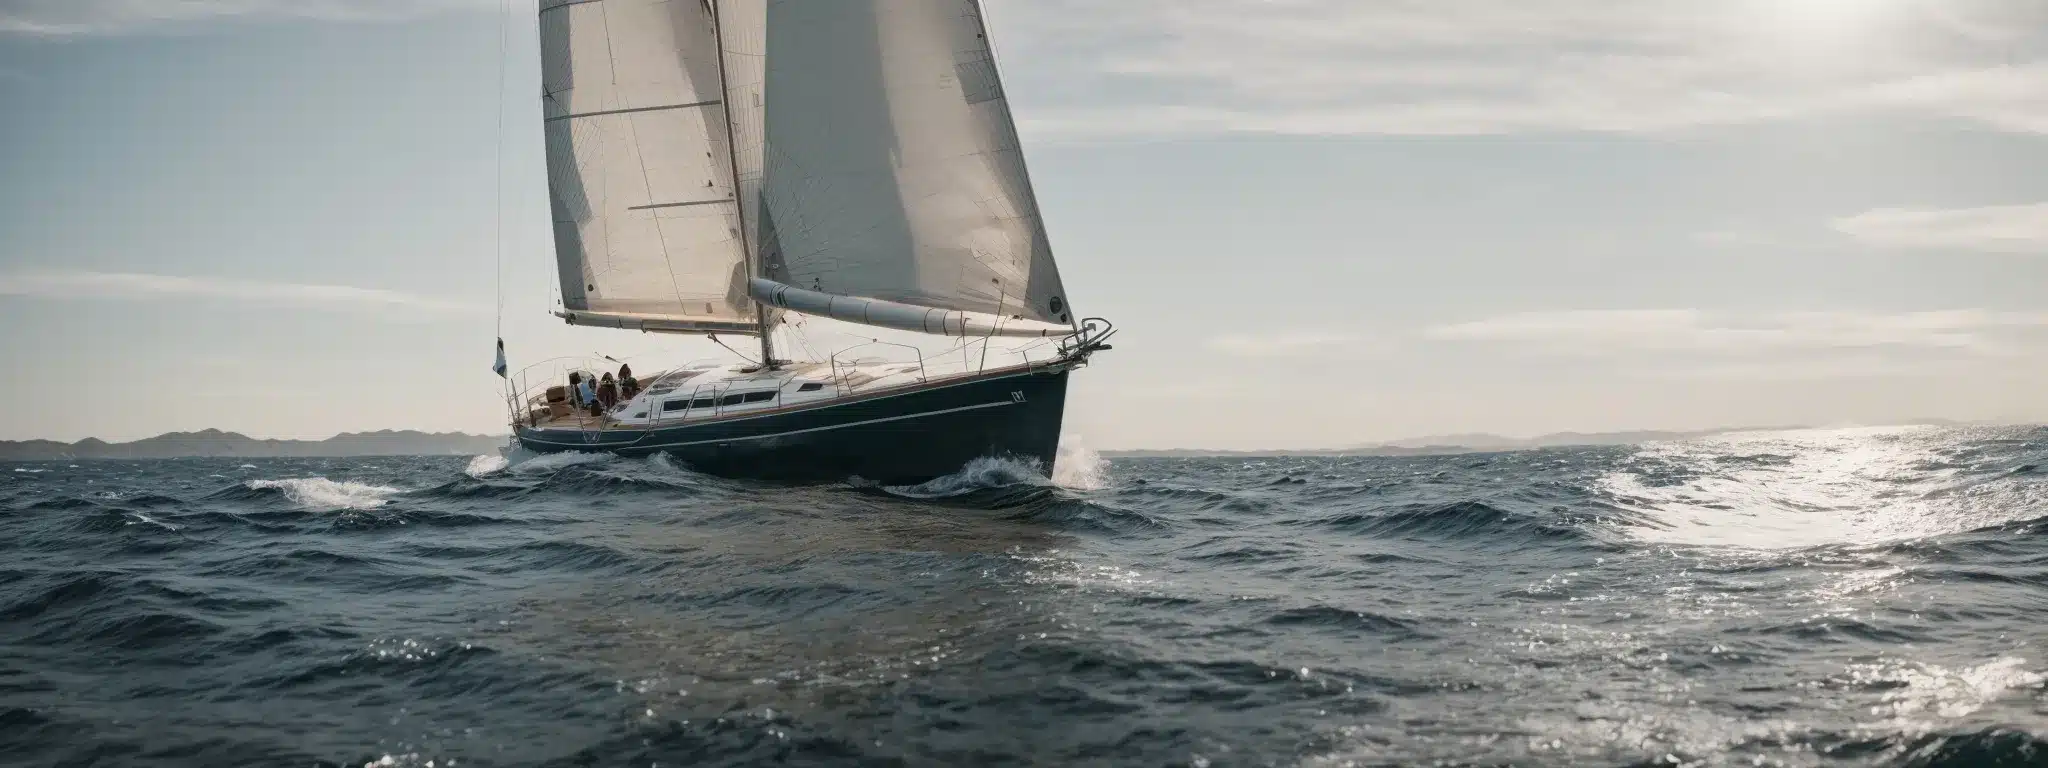 A Sturdy Sailboat Navigating Through Calm Seas Represents A Brand'S Ongoing Journey Of Growth And Adaptation.